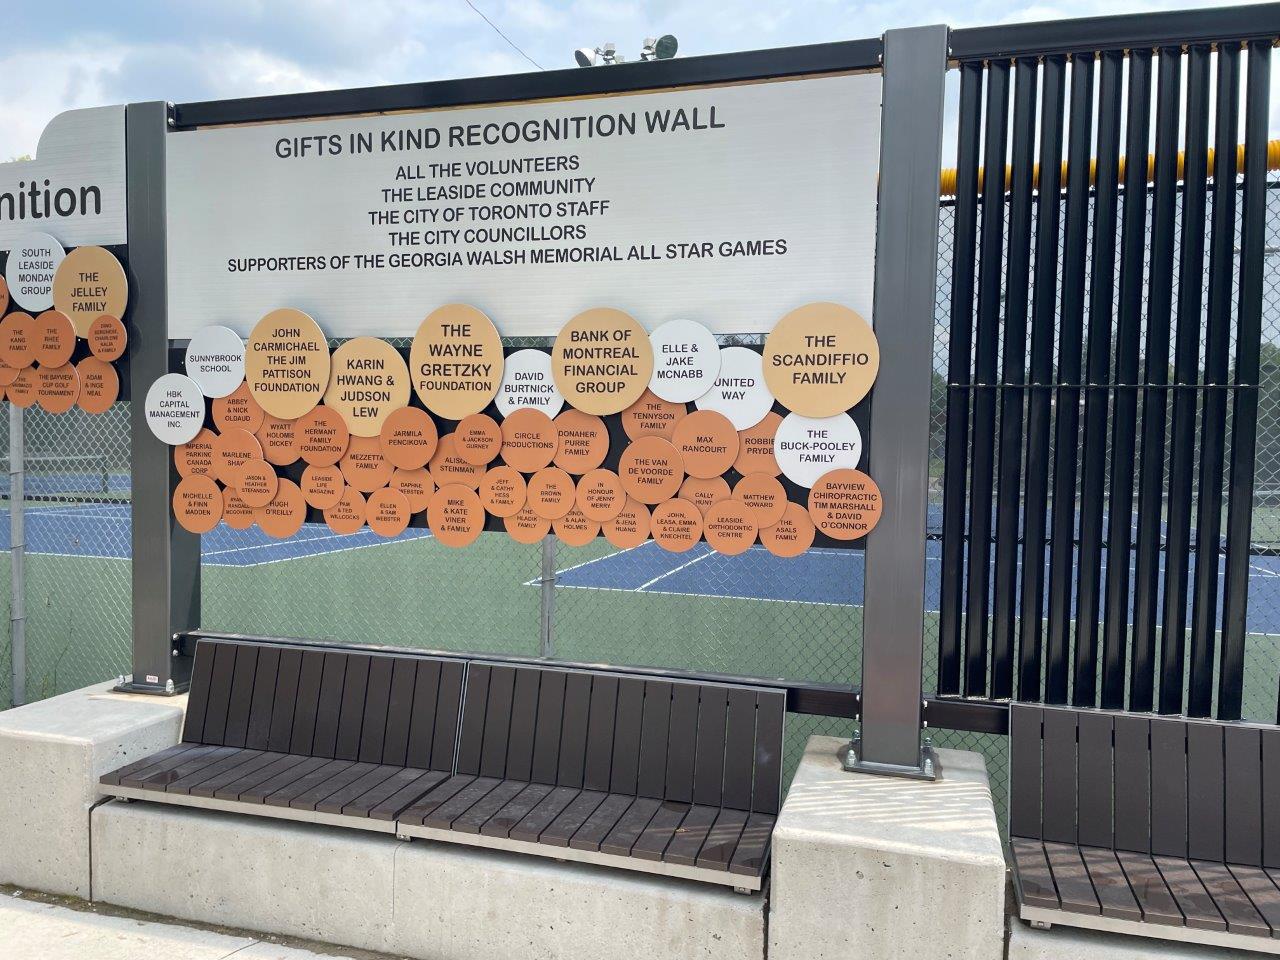 The Donor Wall shown along the exterior fence of the tennis courts with a bench below showing circular balloon shapes in different sizes and colours with donor names on each balloon.